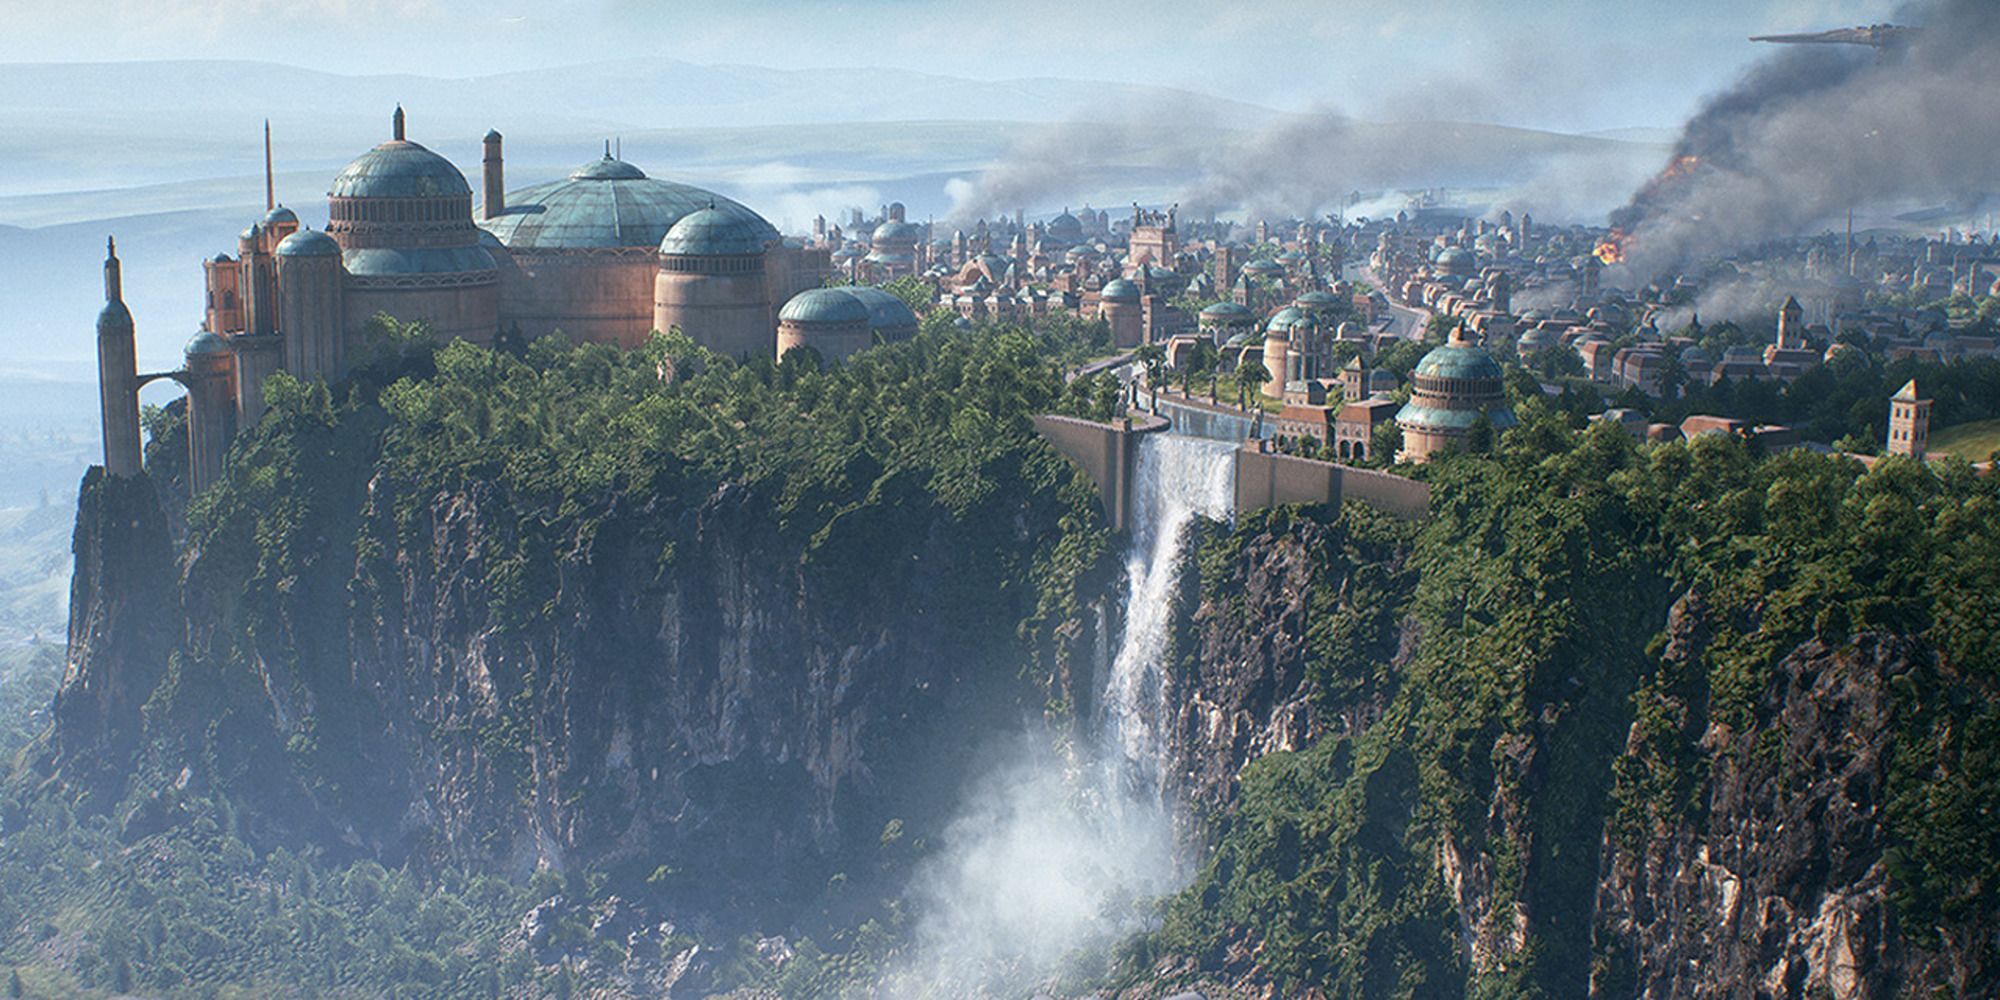 Theed, capital of Naboo from Star Wars Battlefront II